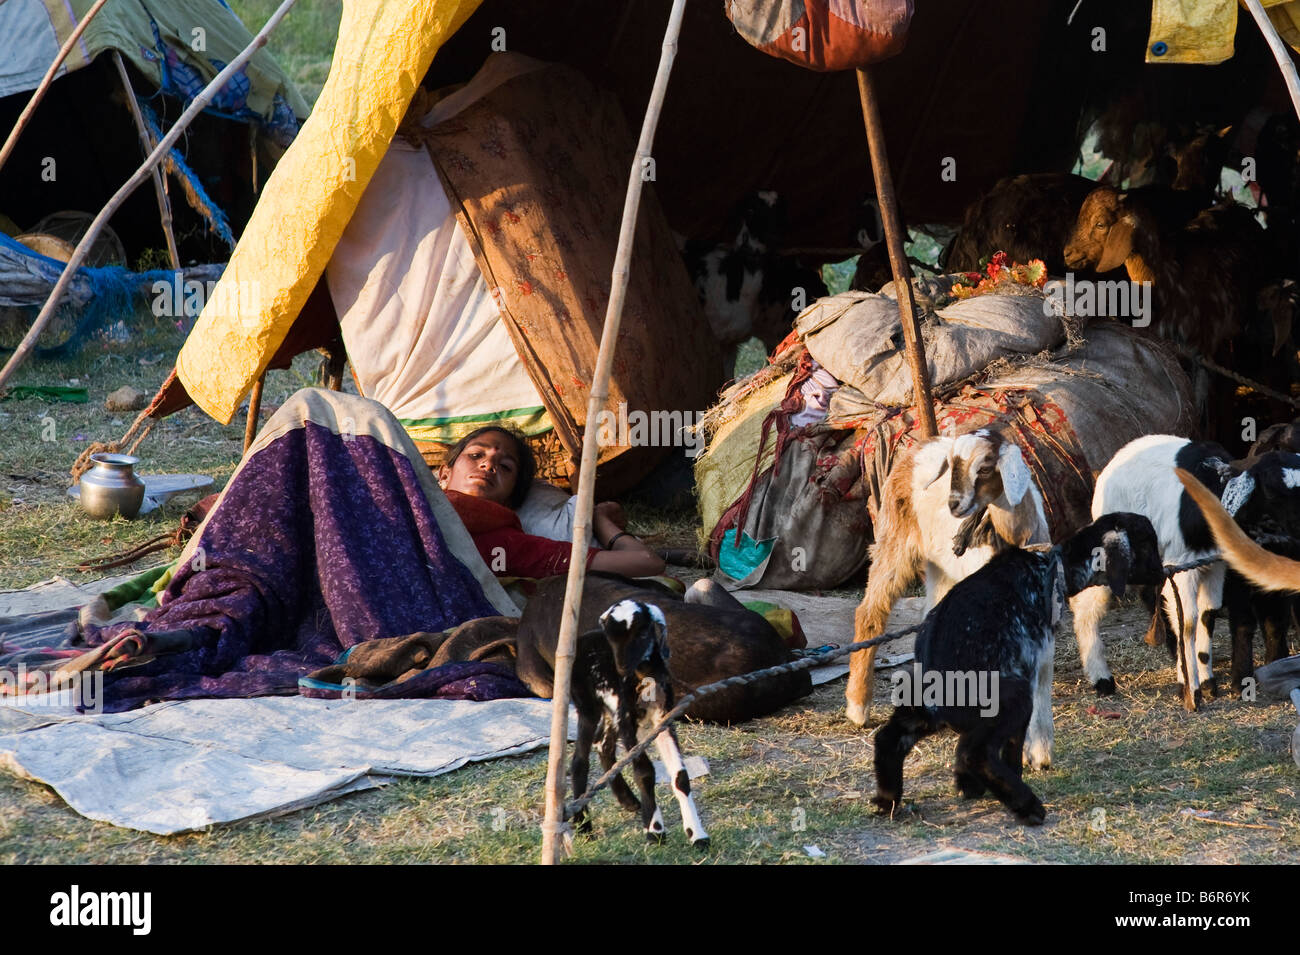 Very poor nomadic indian woman and goats outside their tent in the rural indian countryside at daybreak in morning sunlight. Andhra Pradesh, India Stock Photo